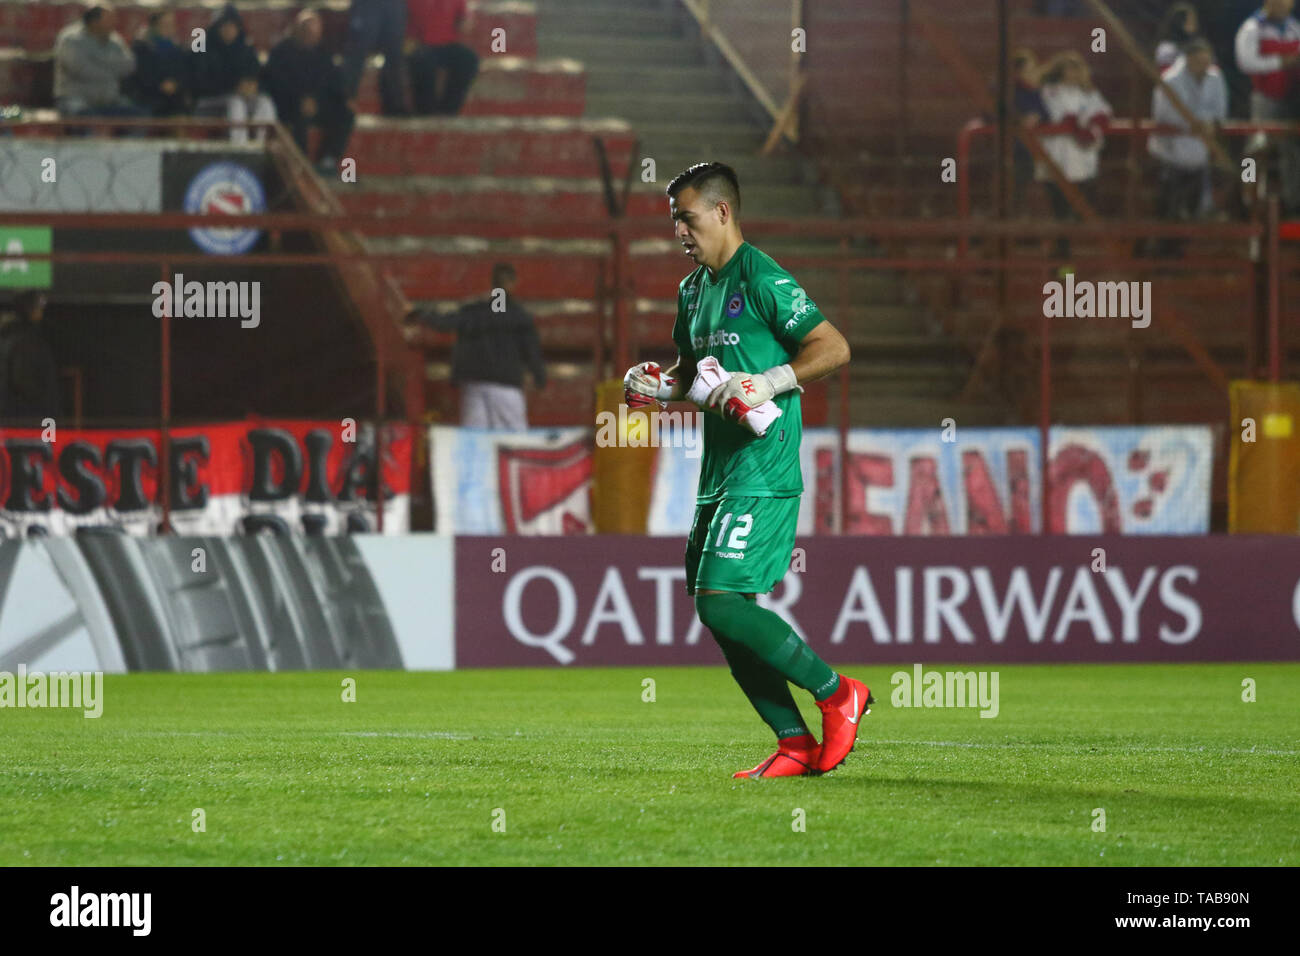 BUENOS AIRES, 23.05.2019: Lucas Chavez, goalkeeper of Argentinos Jrs., during the match between Argentinos Juniors and Deportes Tolima for the 2nd rou Stock Photo